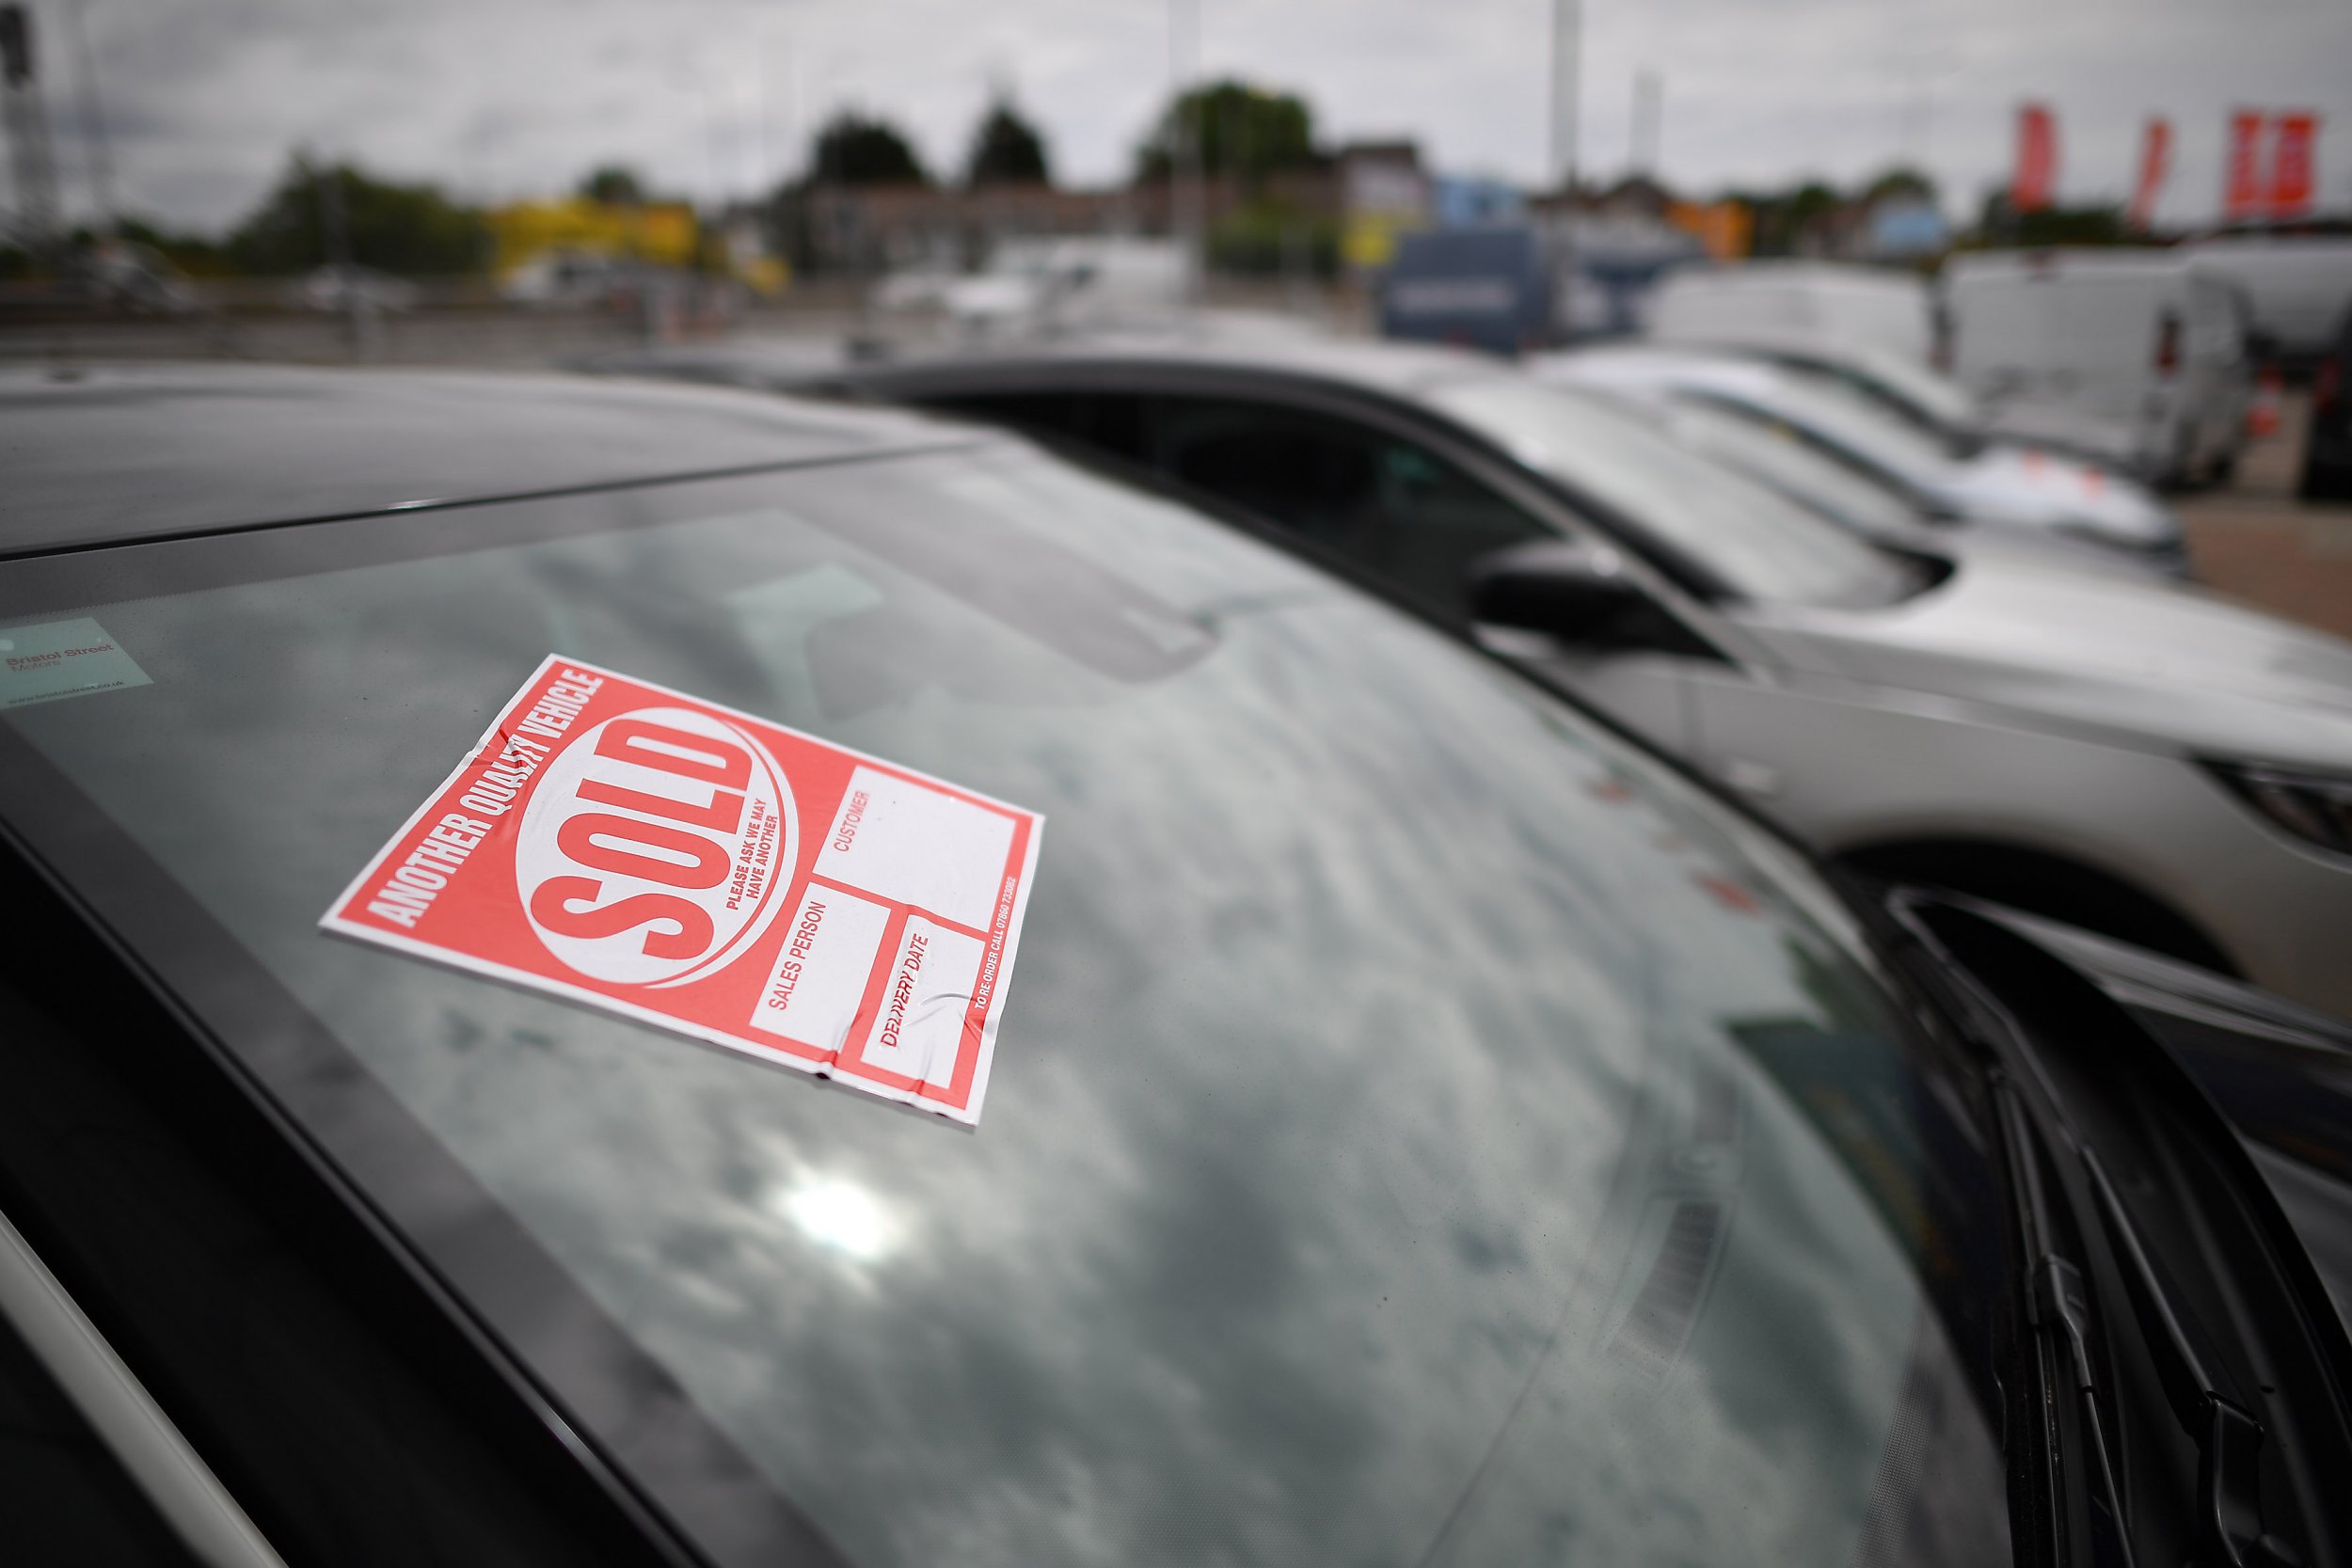 car loan scandal firms must hold enough cash to cover mis-selling complaints